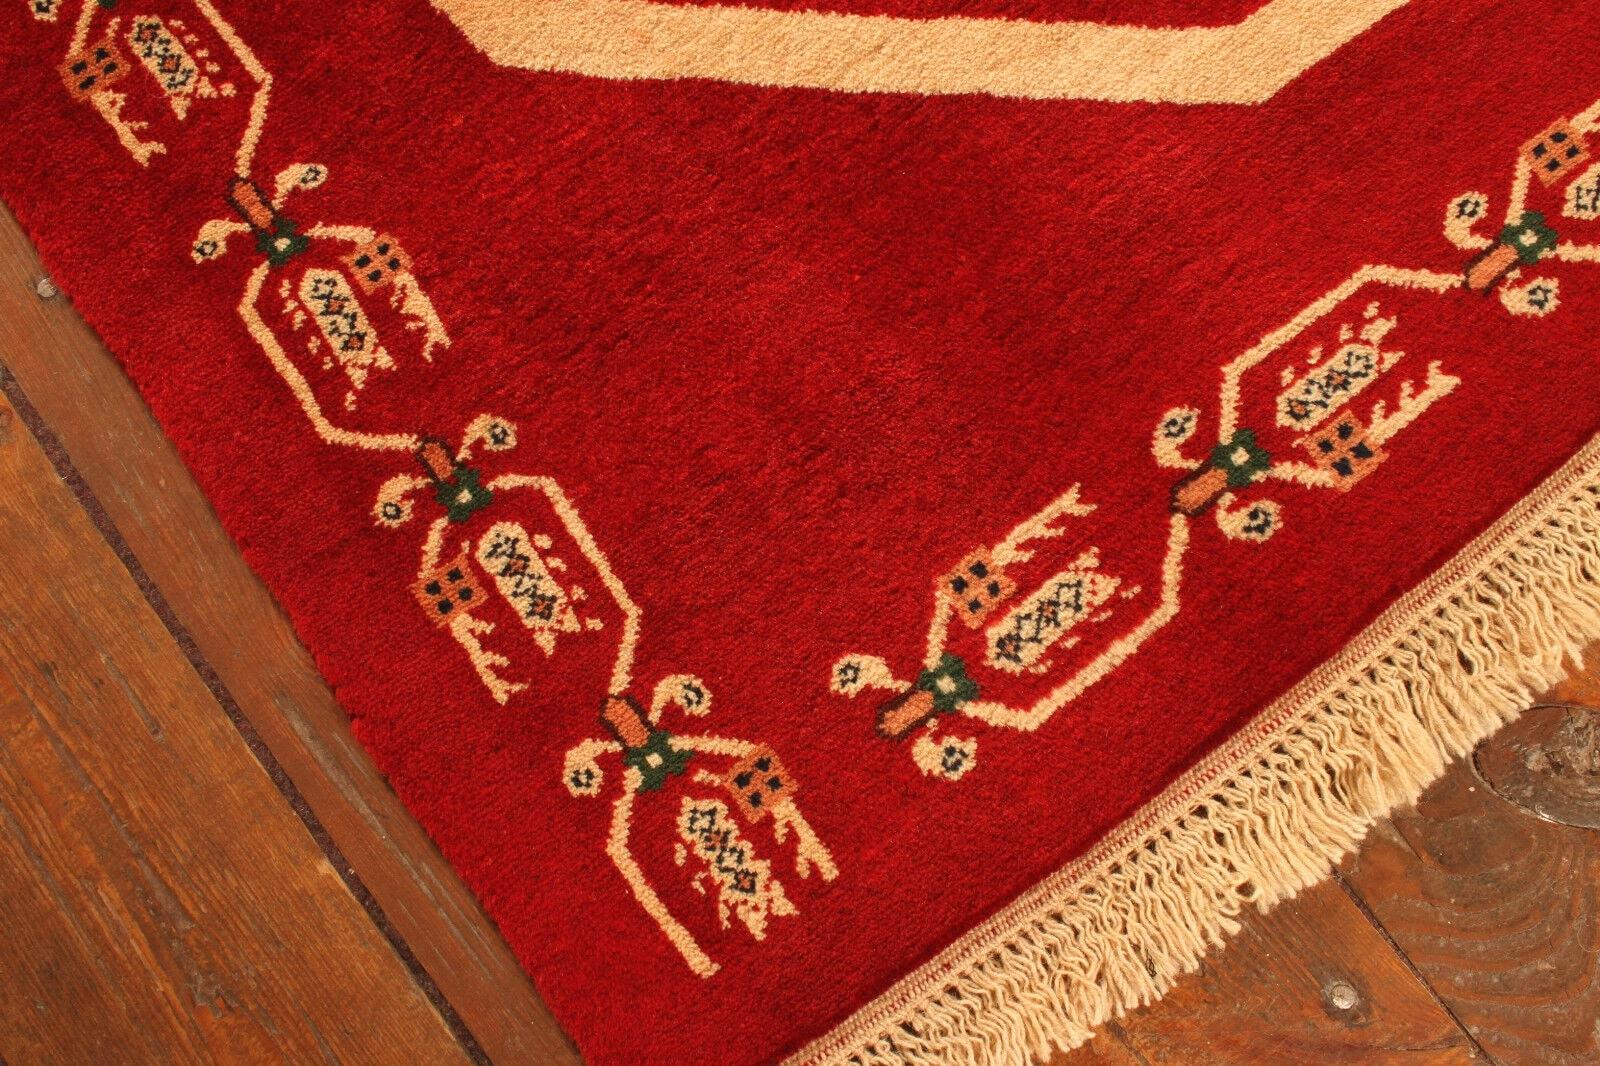 Handmade Vintage Persian Style Yalameh Rug 3.4' x 4.9', 1990s - 1T21 In Good Condition For Sale In Bordeaux, FR